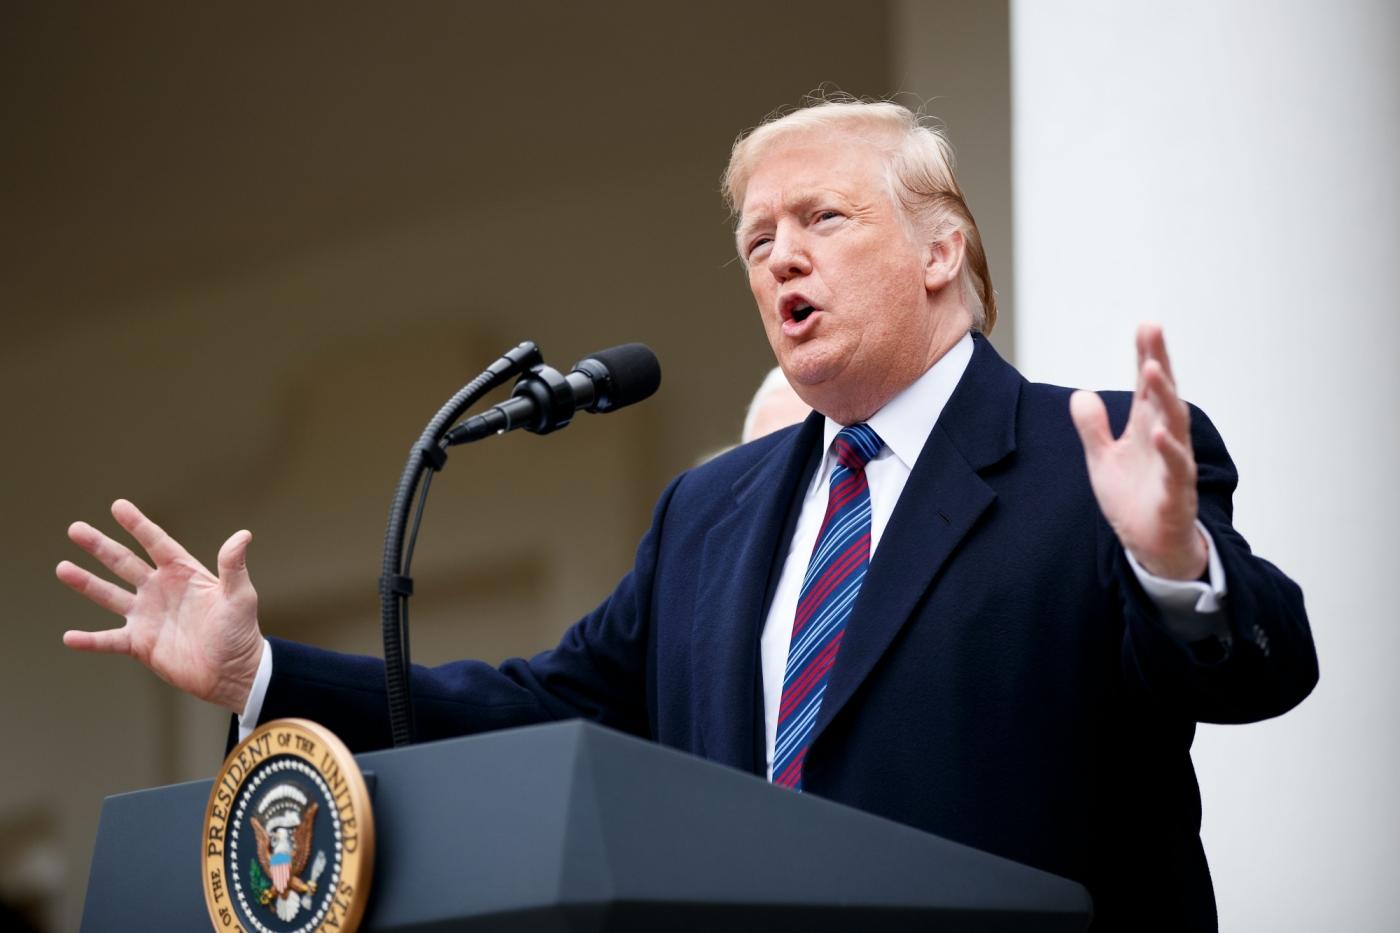 WASHINGTON, Jan. 4, 2019 (Xinhua) -- U.S. President Donald Trump speaks during a press conference at the White House Rose Garden in Washington D.C., the United States, on Jan. 4, 2019. Trump said Friday that he's prepared for a partial government shutdown to last for months or years, after his meeting with Congressional leaders yielded no deal on funding for a U.S.-Mexico border wall. (Xinhua/Ting Shen/IANS) by . 